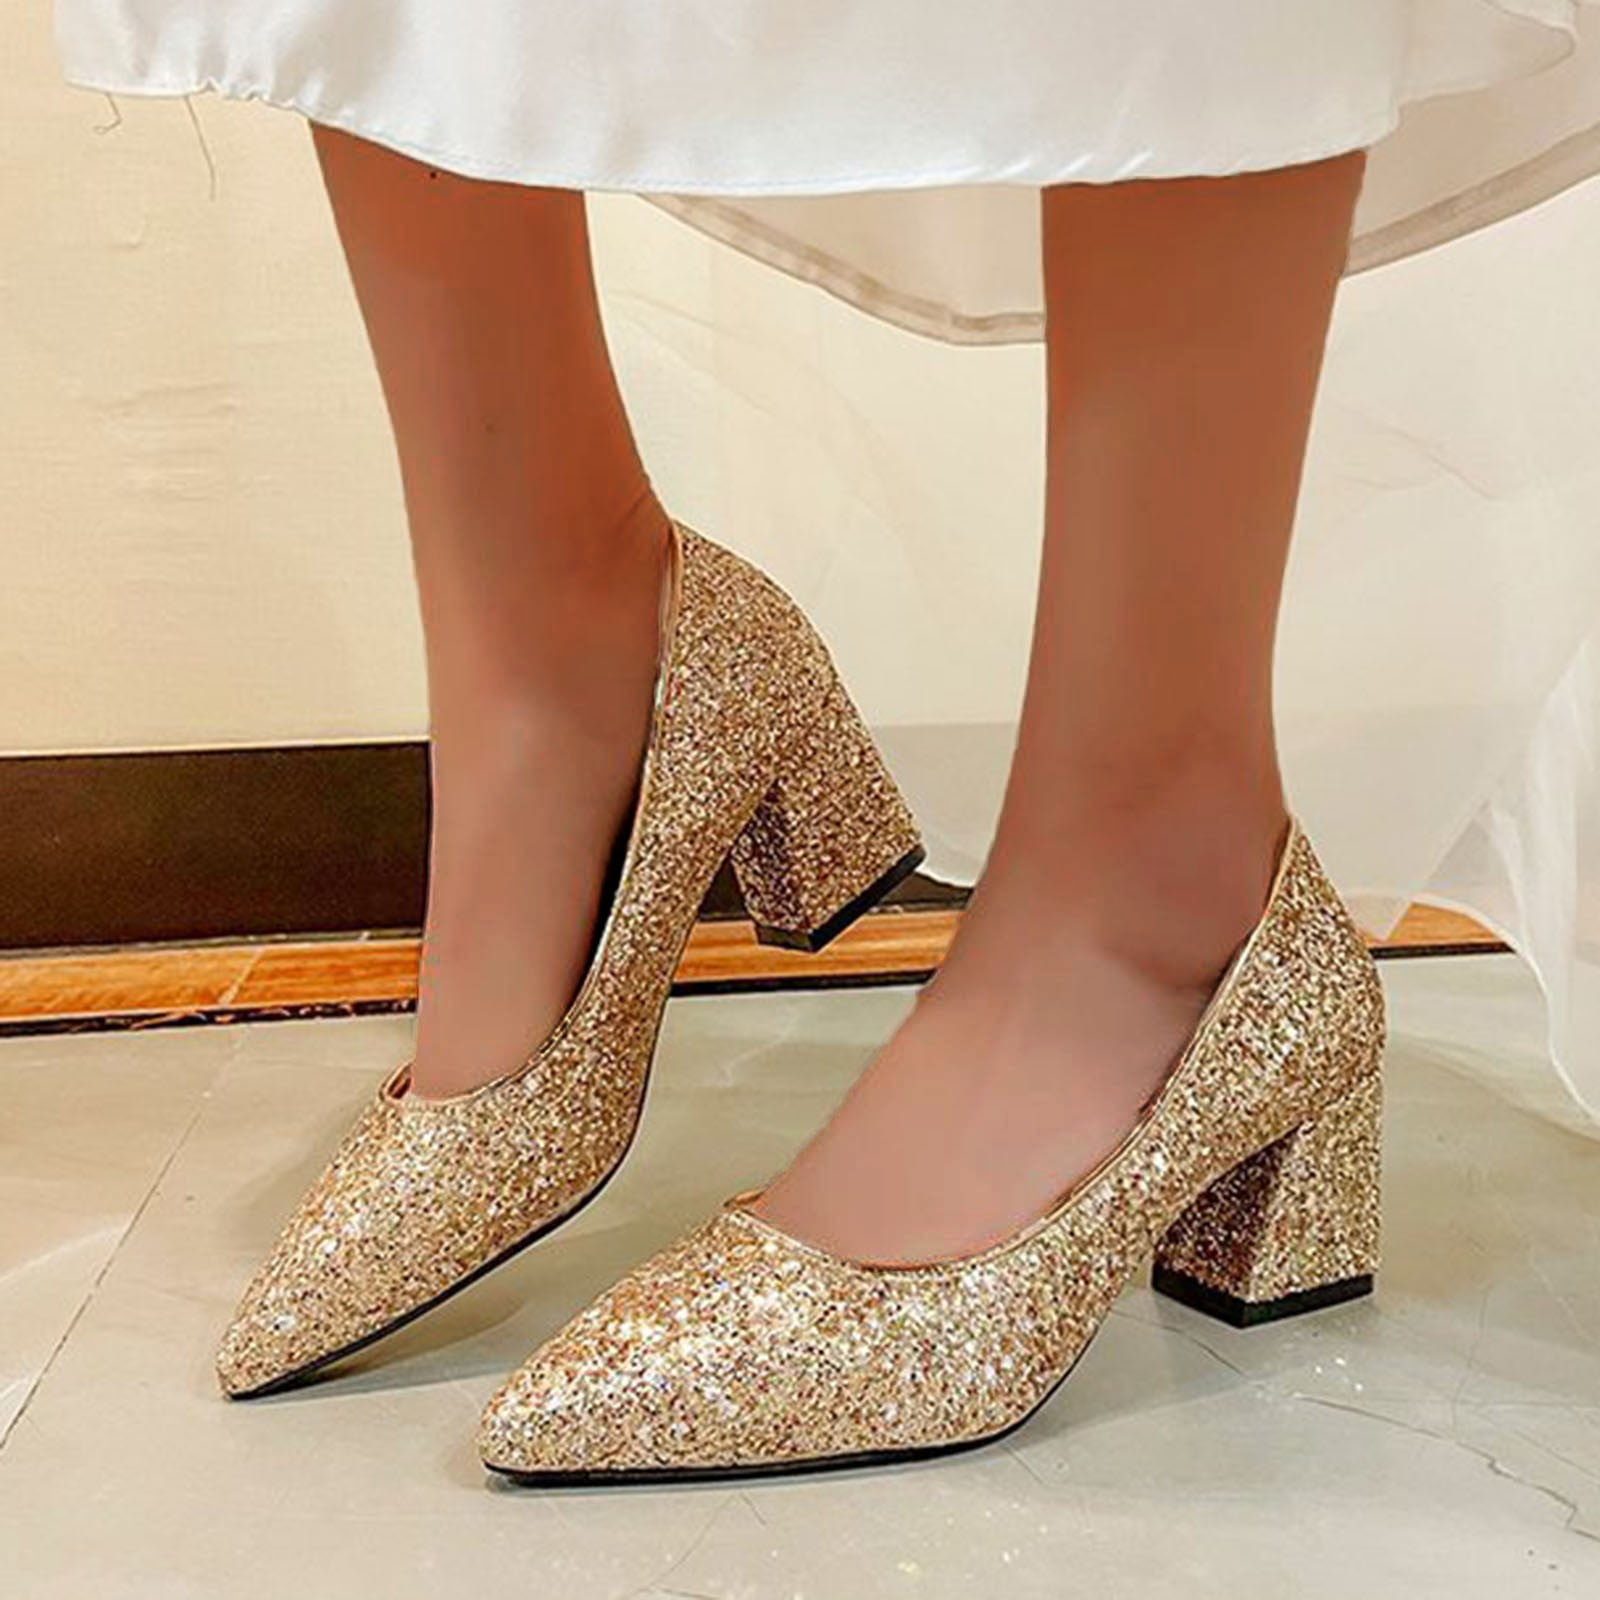 Women's Gold Pumps With Mid Heel, Glittering Lady High Heel Shoes | SHEIN